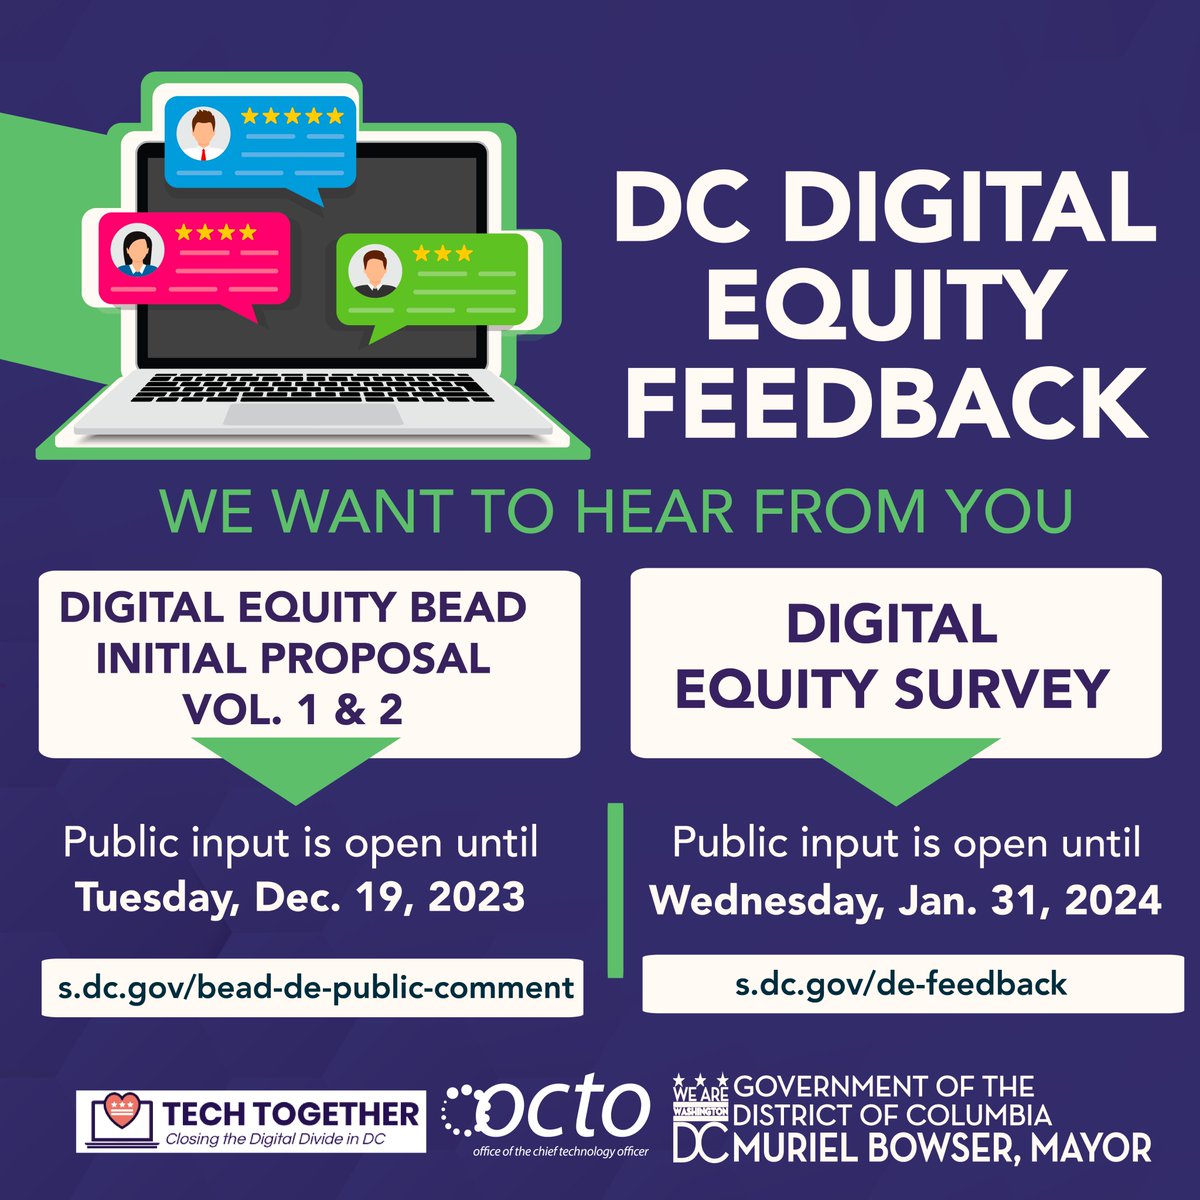 We're committed to making sure that residents across all 8 wards can thrive in the digital age. We want to hear from you on how we can make technology more equitable in the District. Provide your feedback on @OCTODC's Digital Equity Plan ➡️ s.dc.gov/bead-de-public…